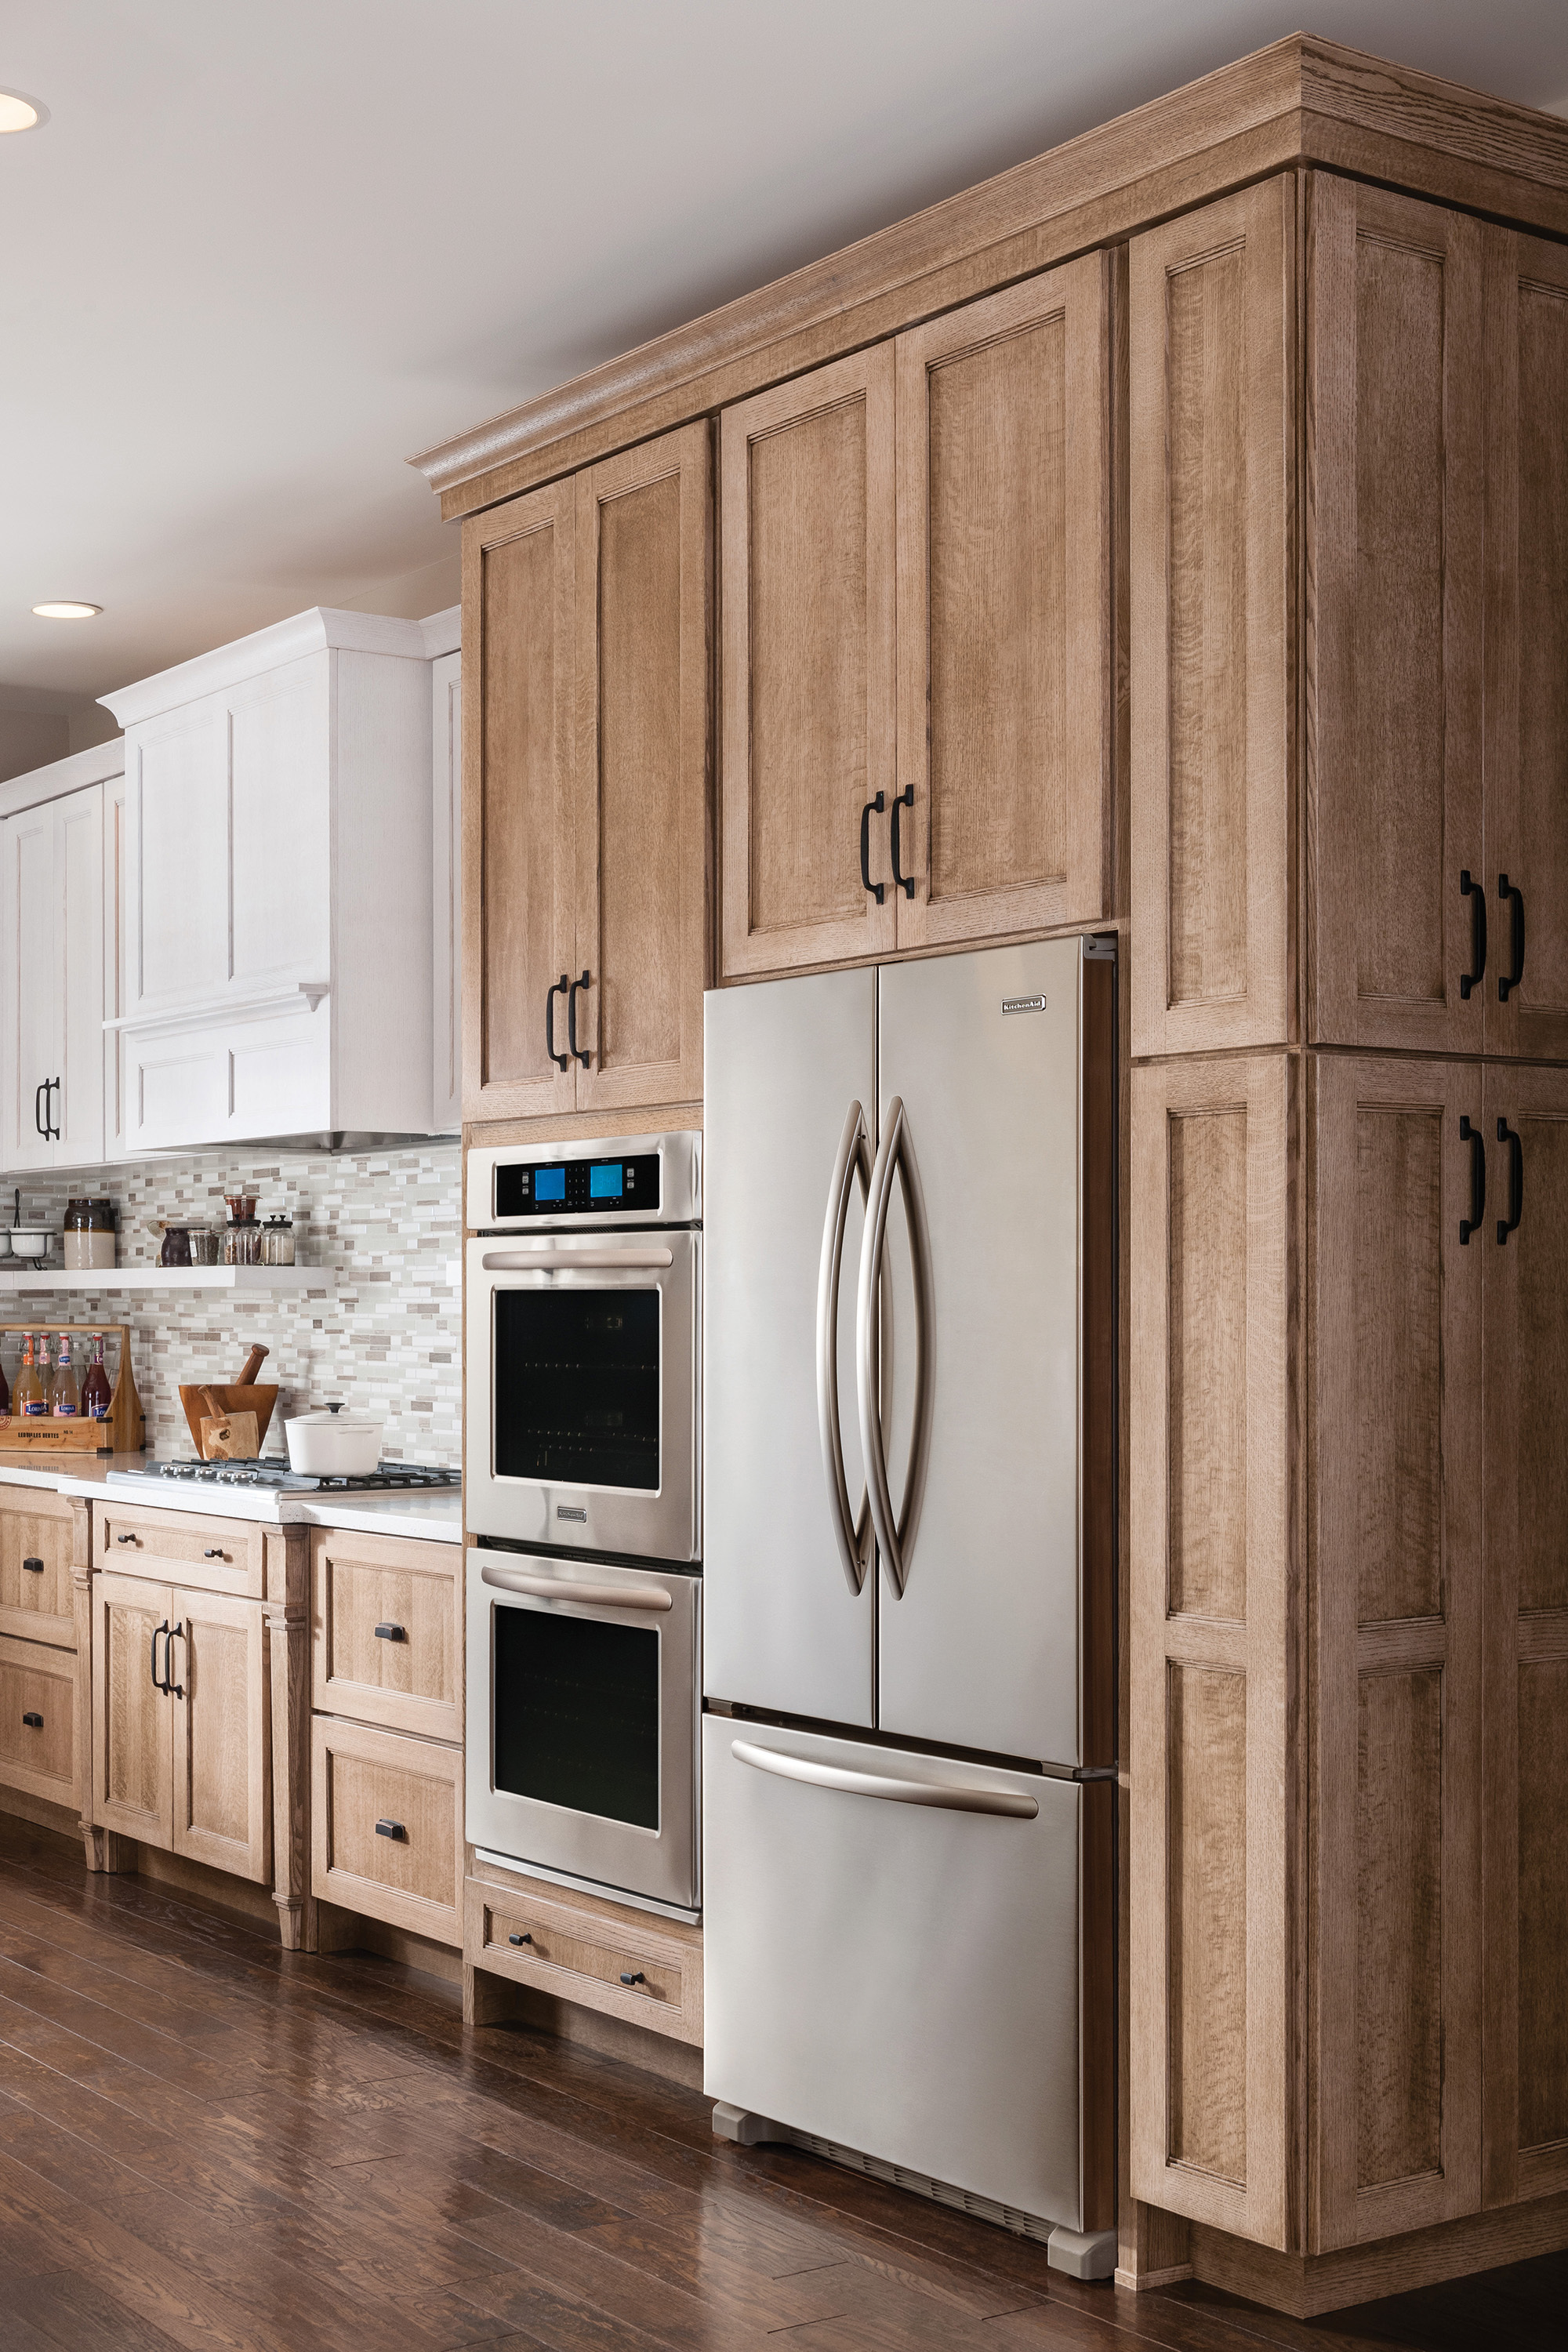 Schuler Cabinetry Launches New Cappuccino Finish | Business Wire